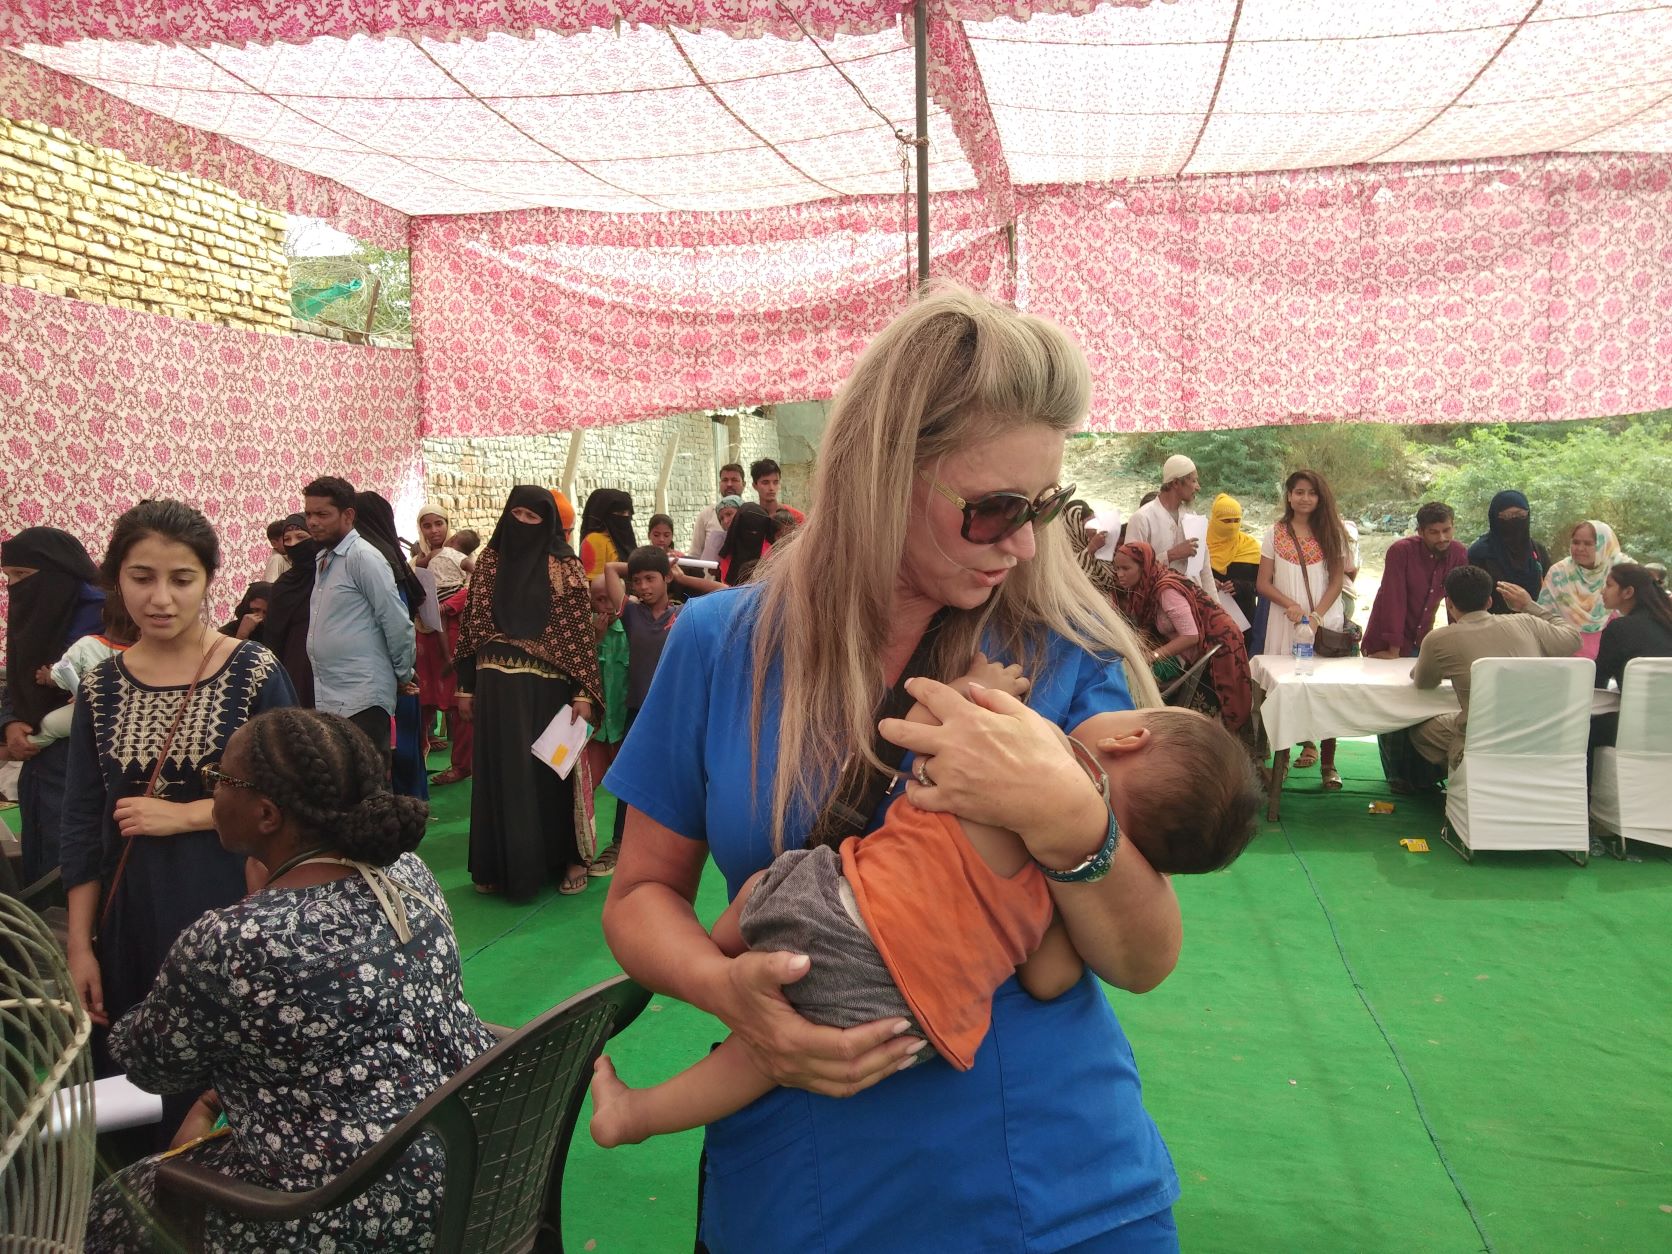 Donna volunteering on a medical mission trip in India (2019)